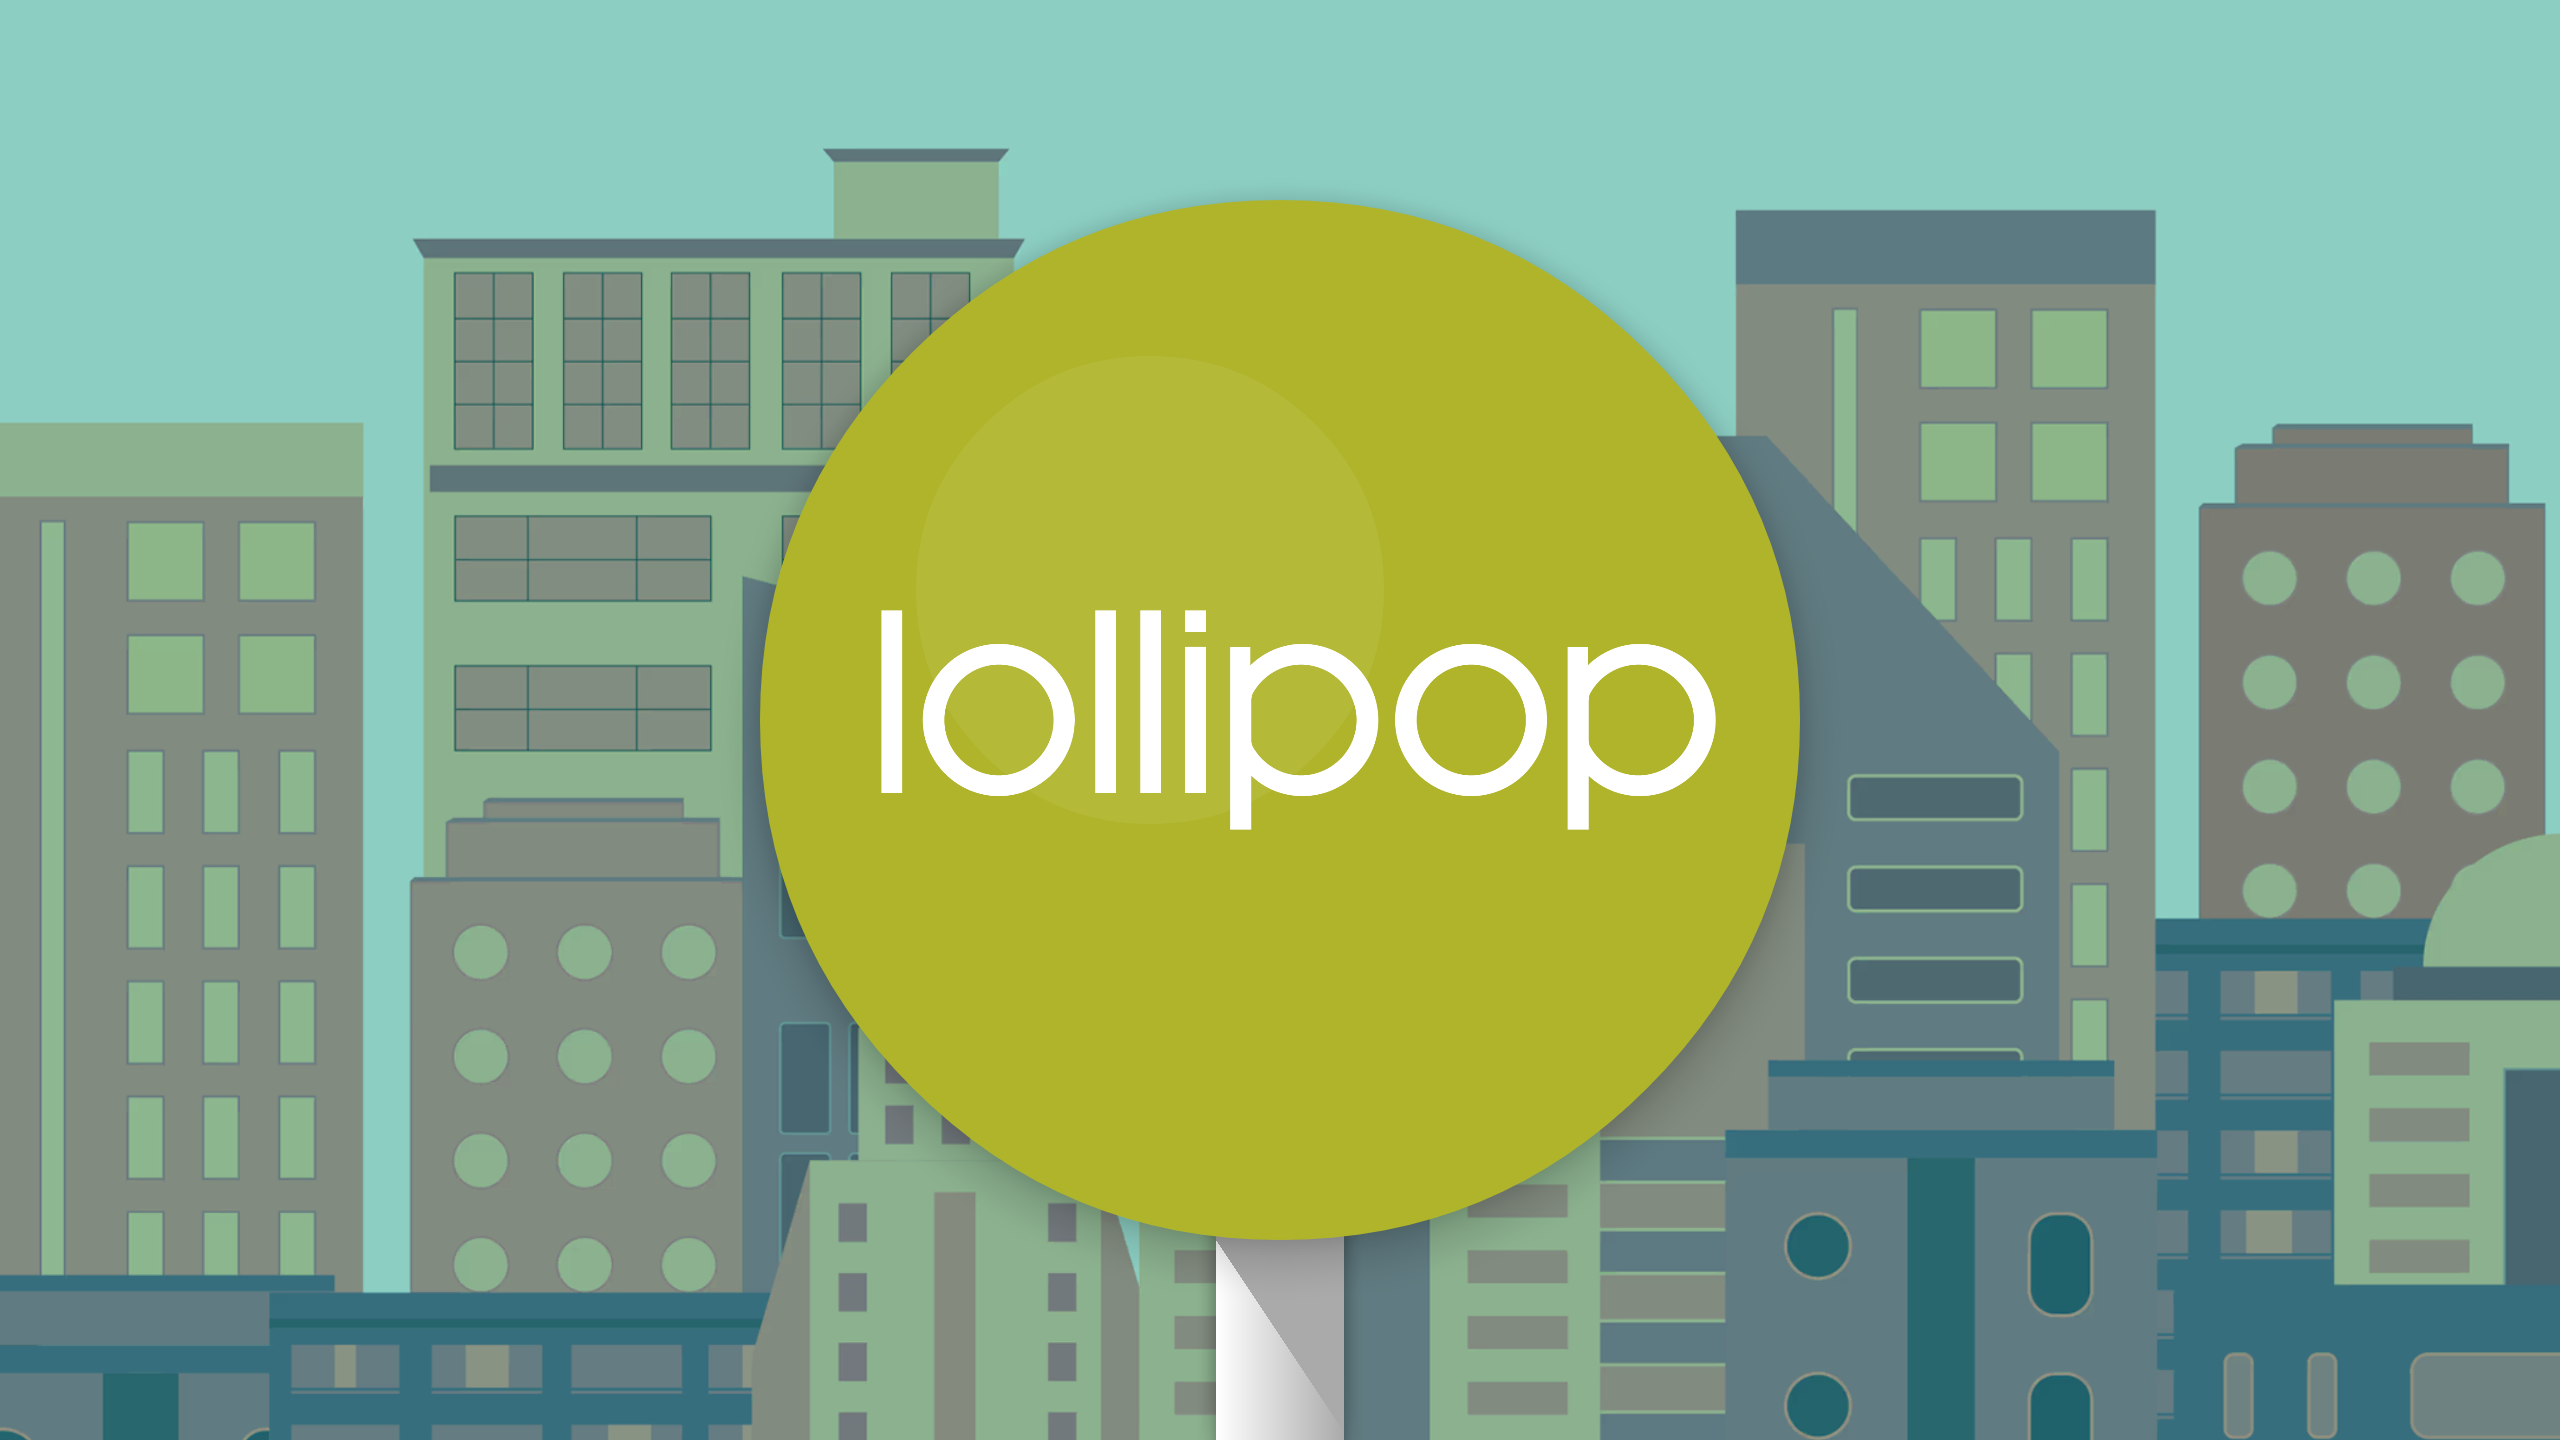 Galaxy Note 3 Neo confirmed to receive Lollipop in the UK